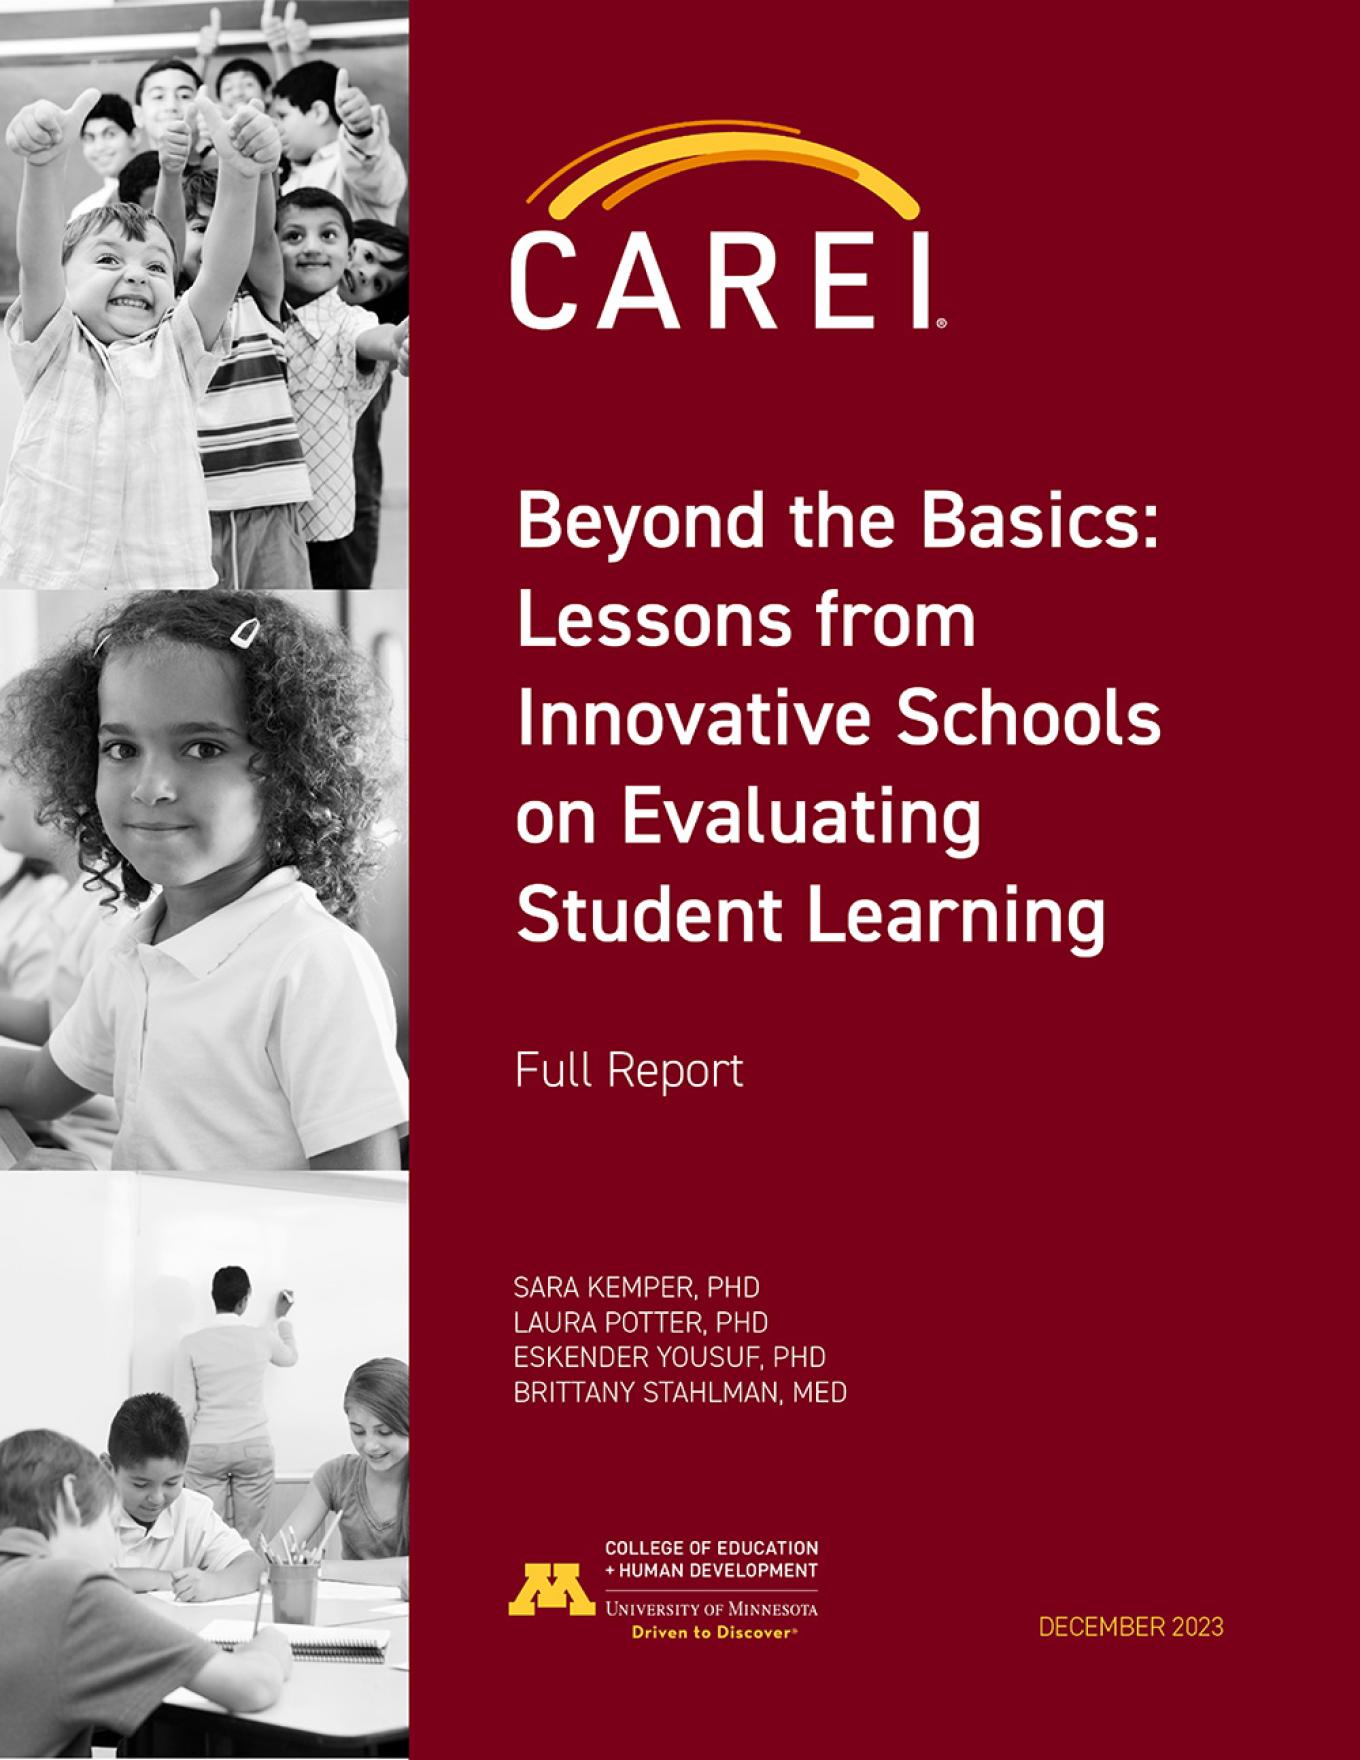 carei beyond the basics: lessons from innovative schools on evaluating student learning full report cover